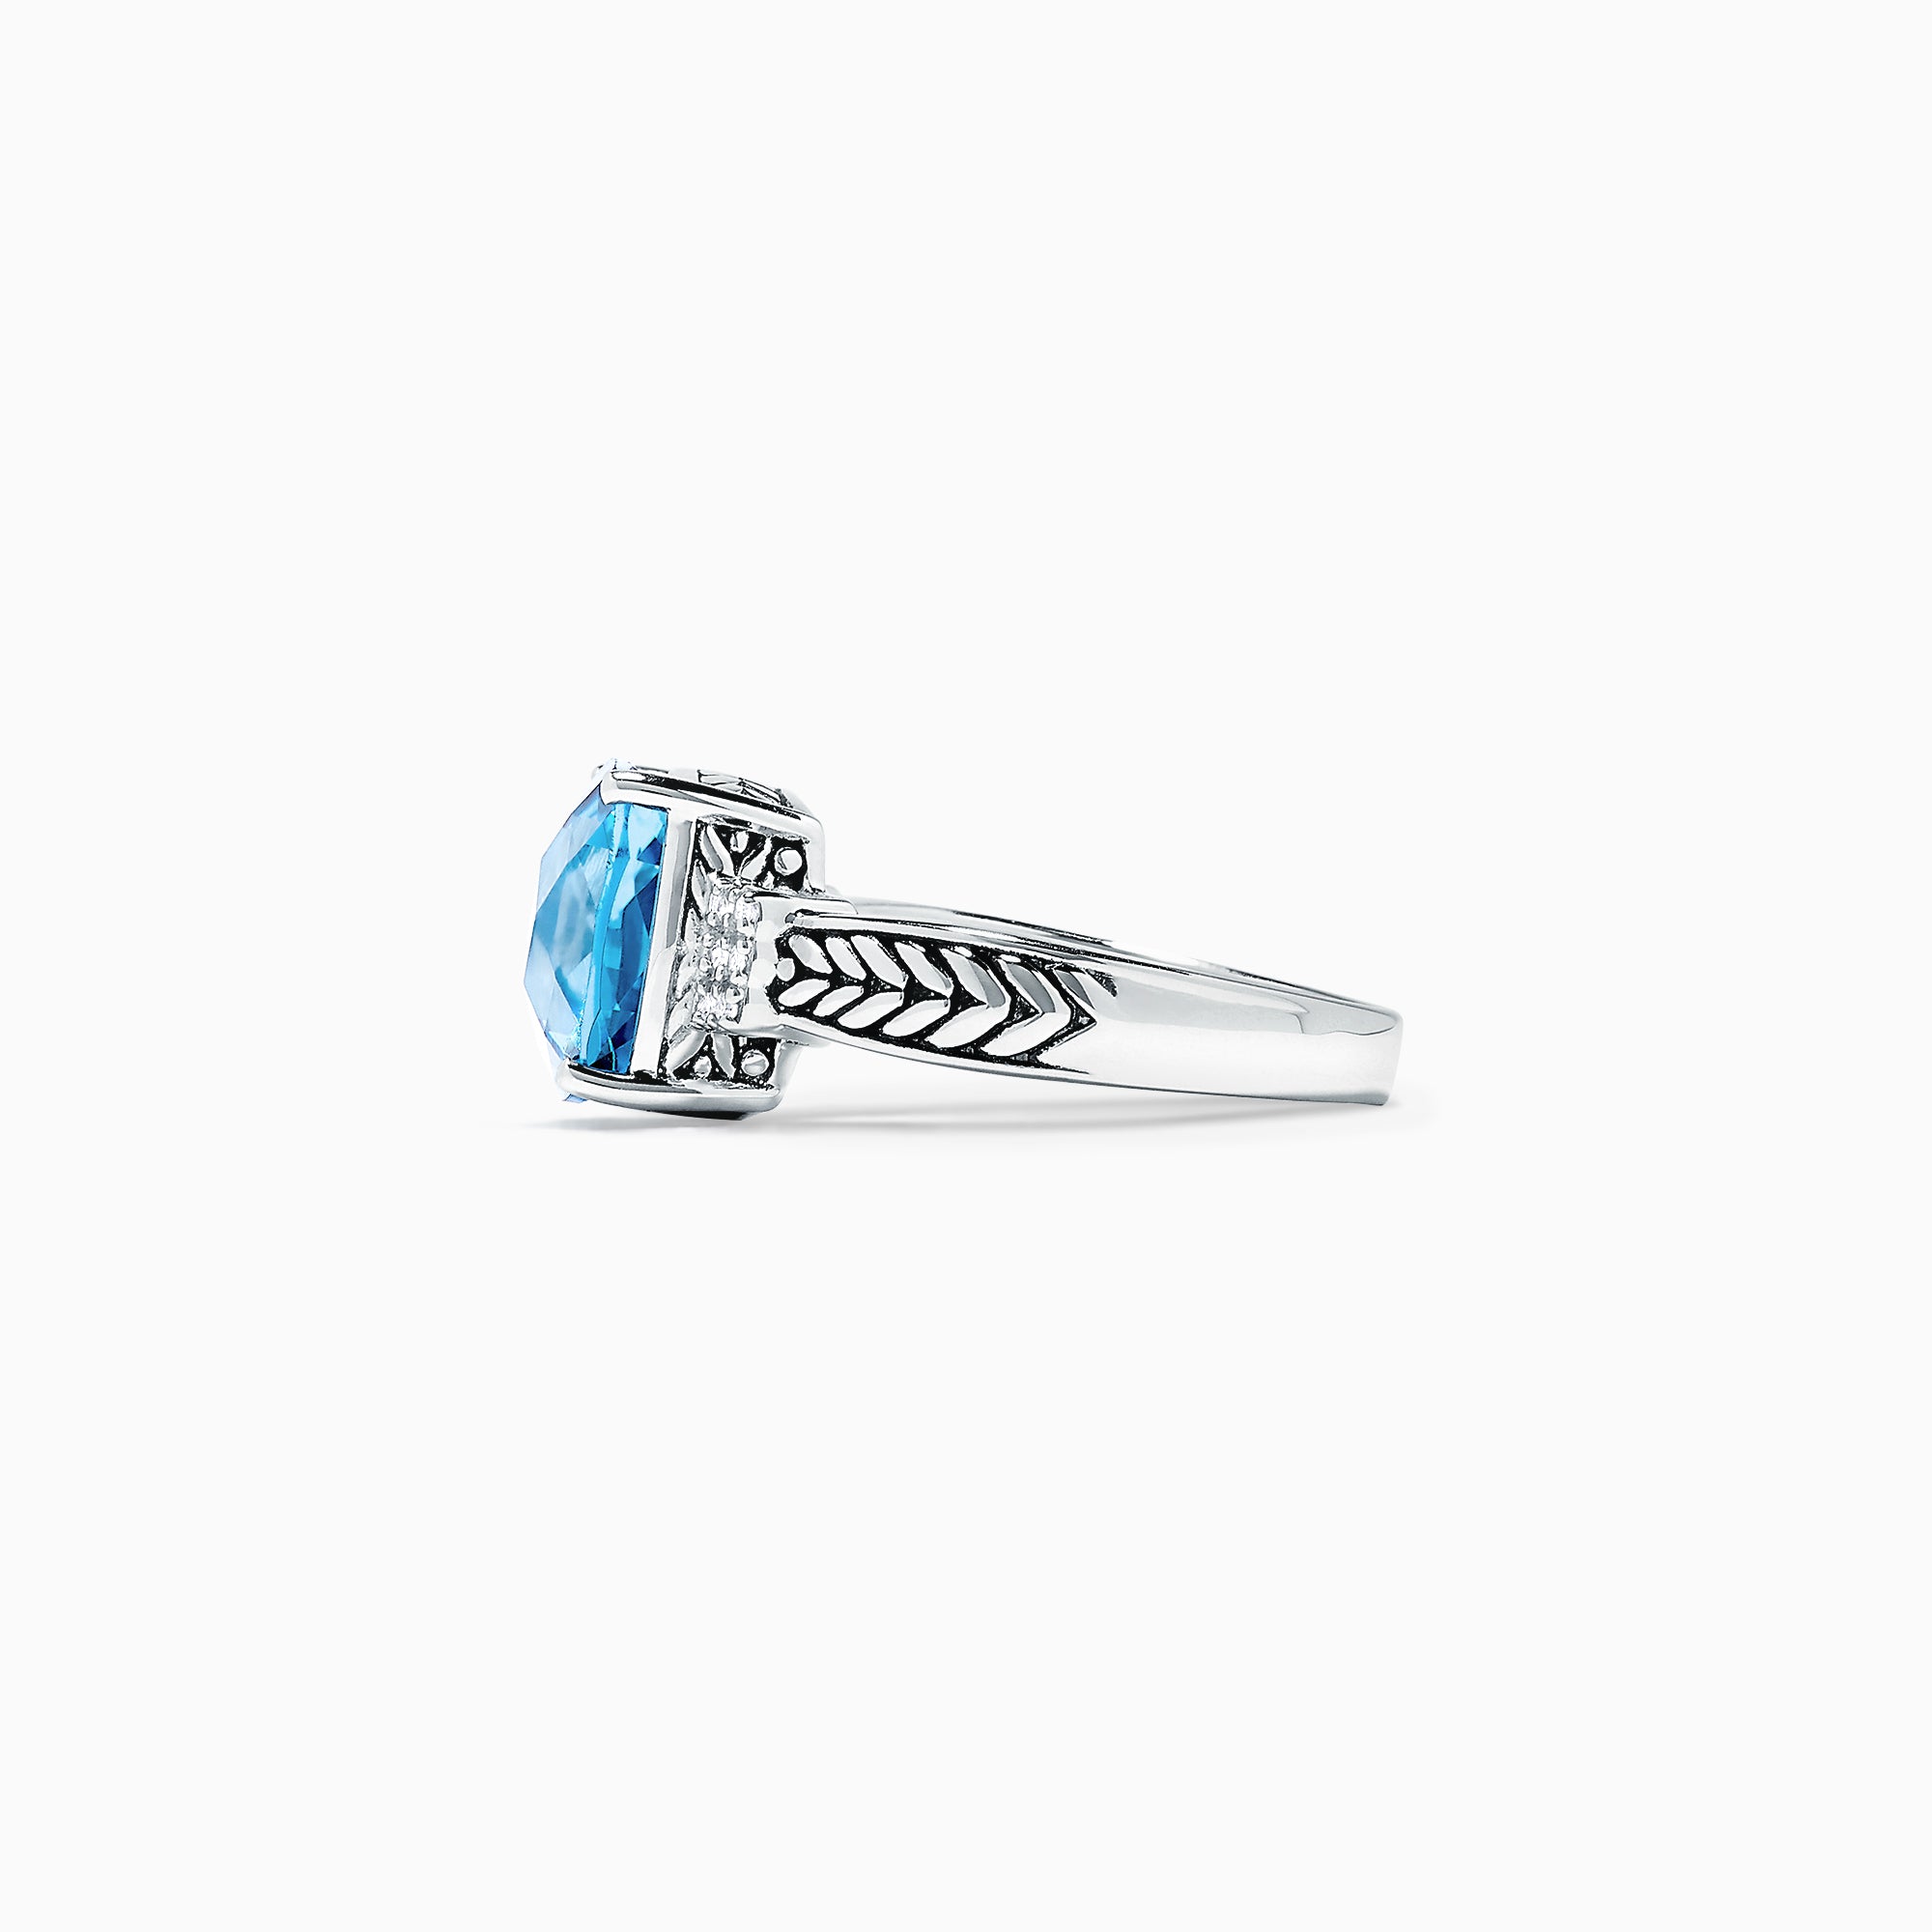 Effy 925 Sterling Silver Blue Topaz and Diamond Ring, 5.05 TCW